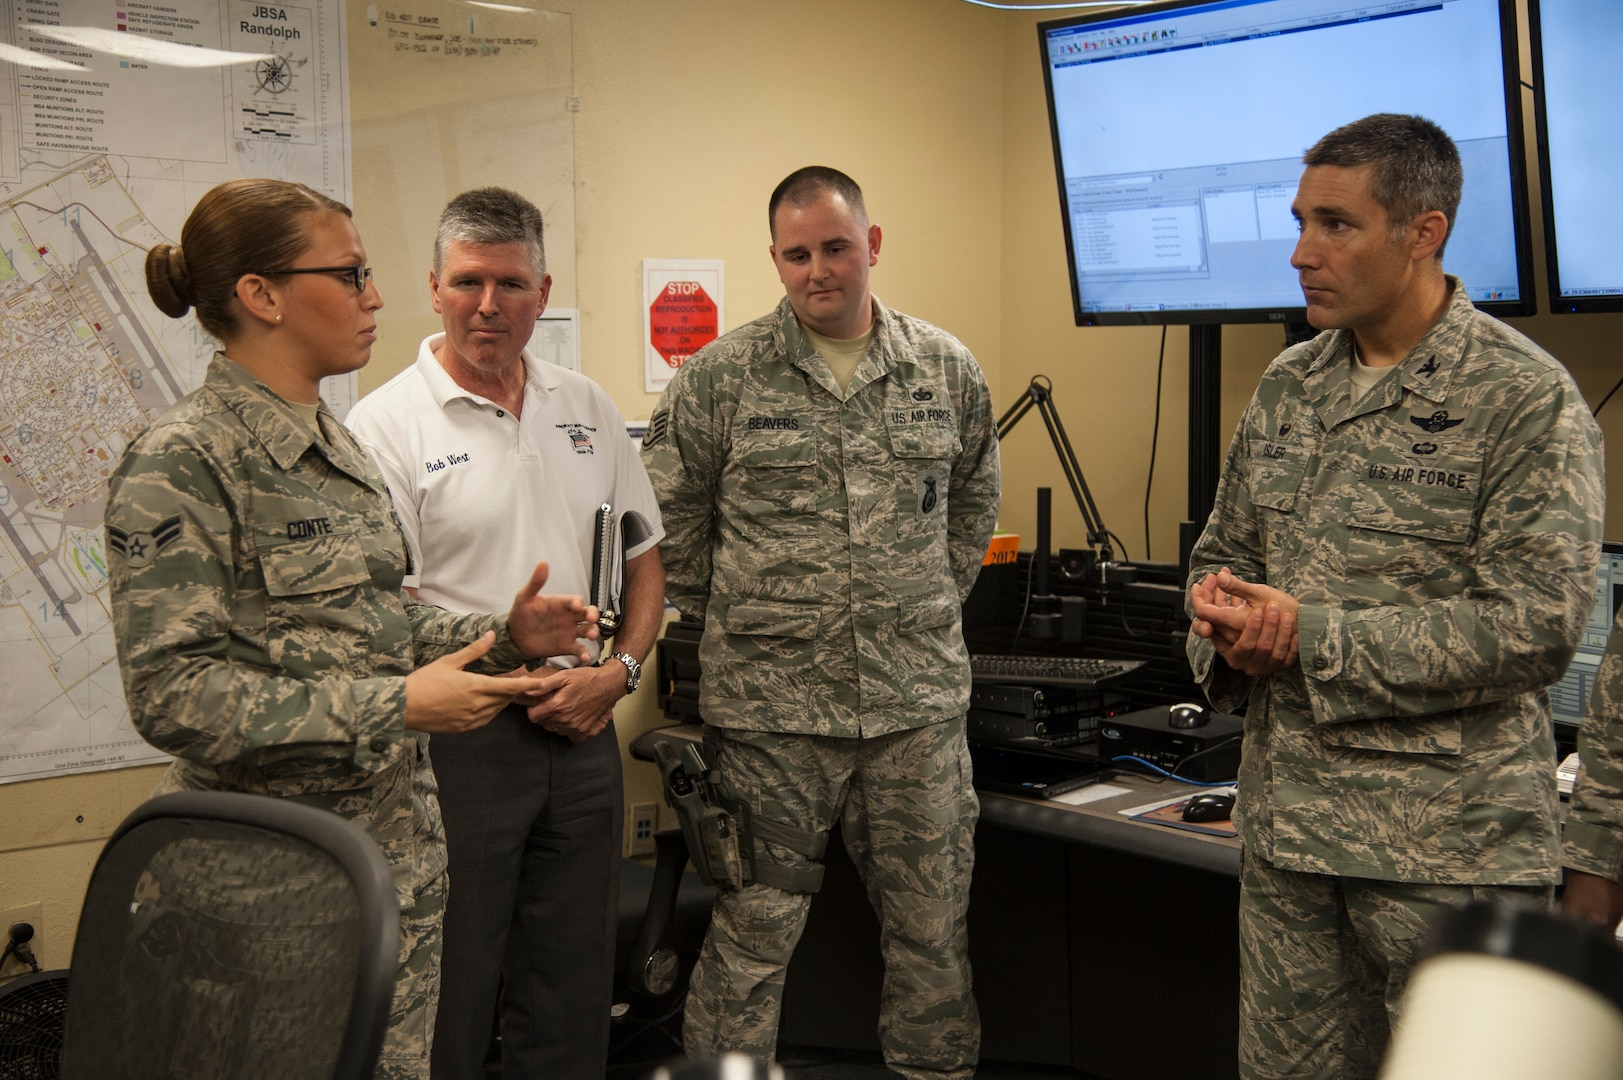 Col. Matthew Isler (right), 12th Flying Training Wing commander, and Robert West (second from left), 12th FTW director of maintenance, speak to Airman 1st Class Victoria Conte and Staff Sgt. Samuel Beavers, 902nd Security Forces Squadron Base Defense Operations Center controllers, Oct. 20 at the Joint Base San Antonio-Randolph BDOC. Members of the 12th FTW took part in a 502nd Security Forces Logistics Support Group immersion tour to gain a better understanding of the mission and capabilities of the 502nd SFLSG. (U.S. Air Force photo by Airman 1st Class Stormy Archer)